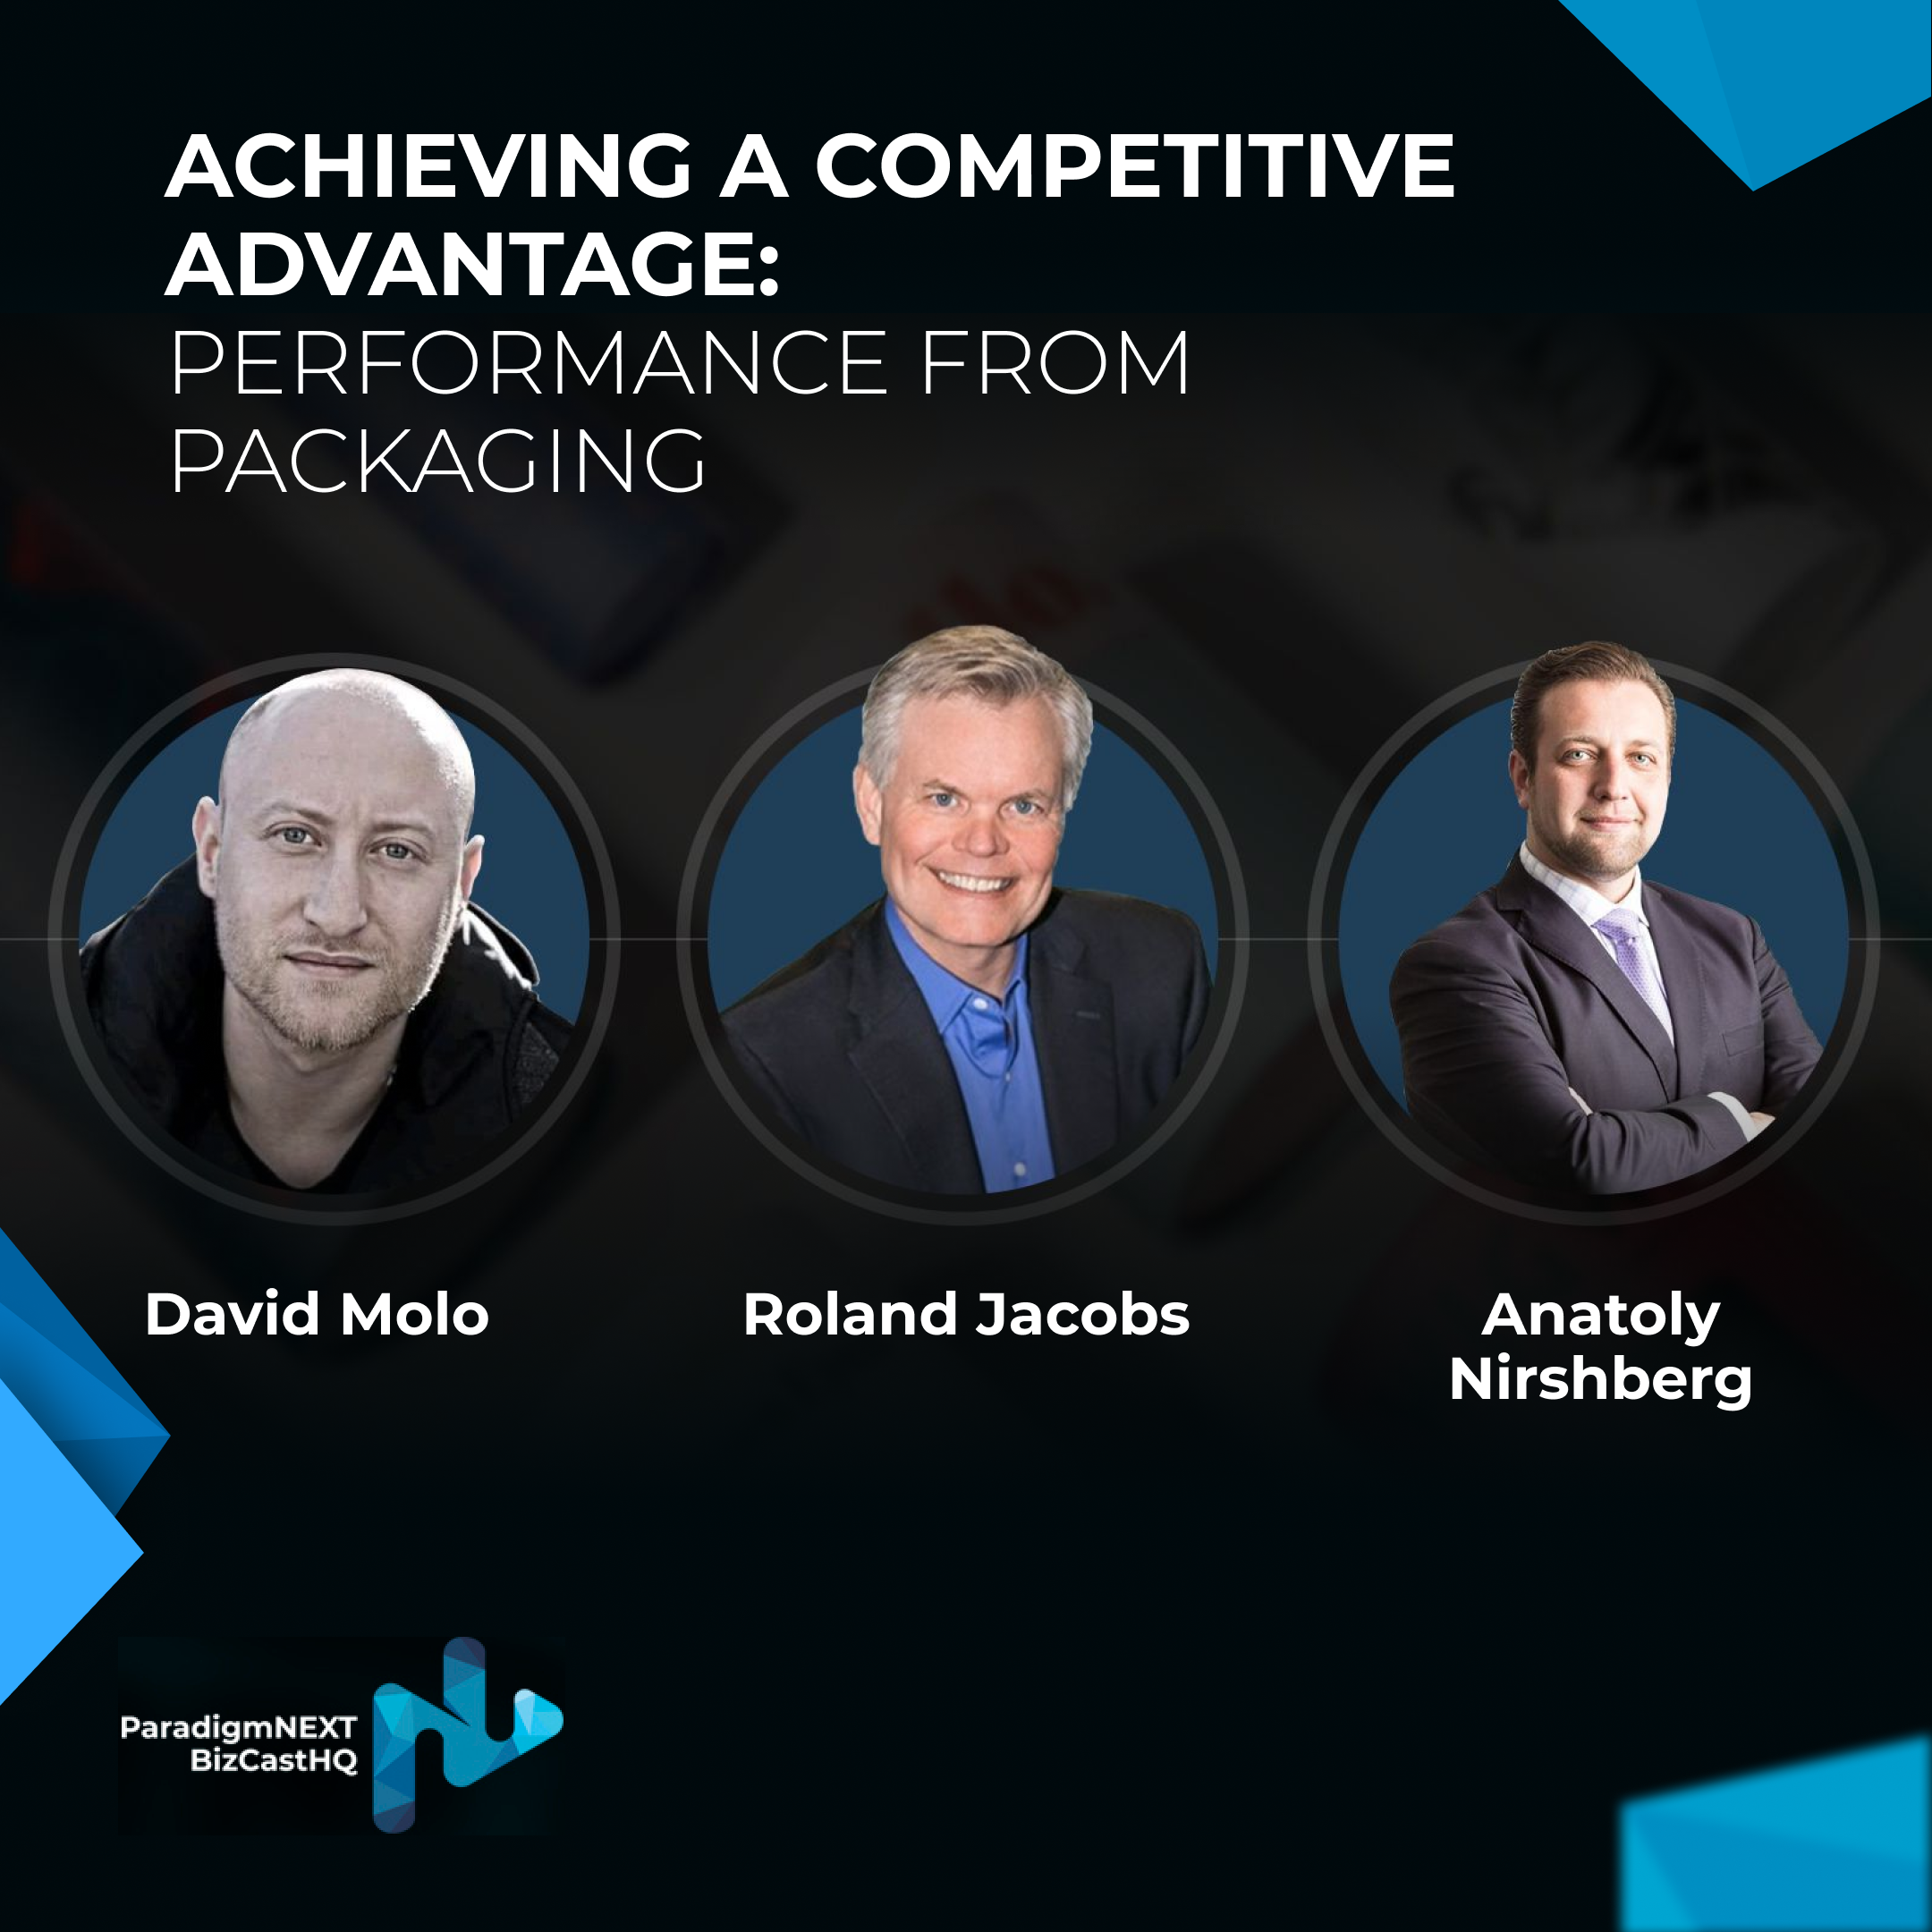 Achieving a Competitive Advantage: Performance from Packaging